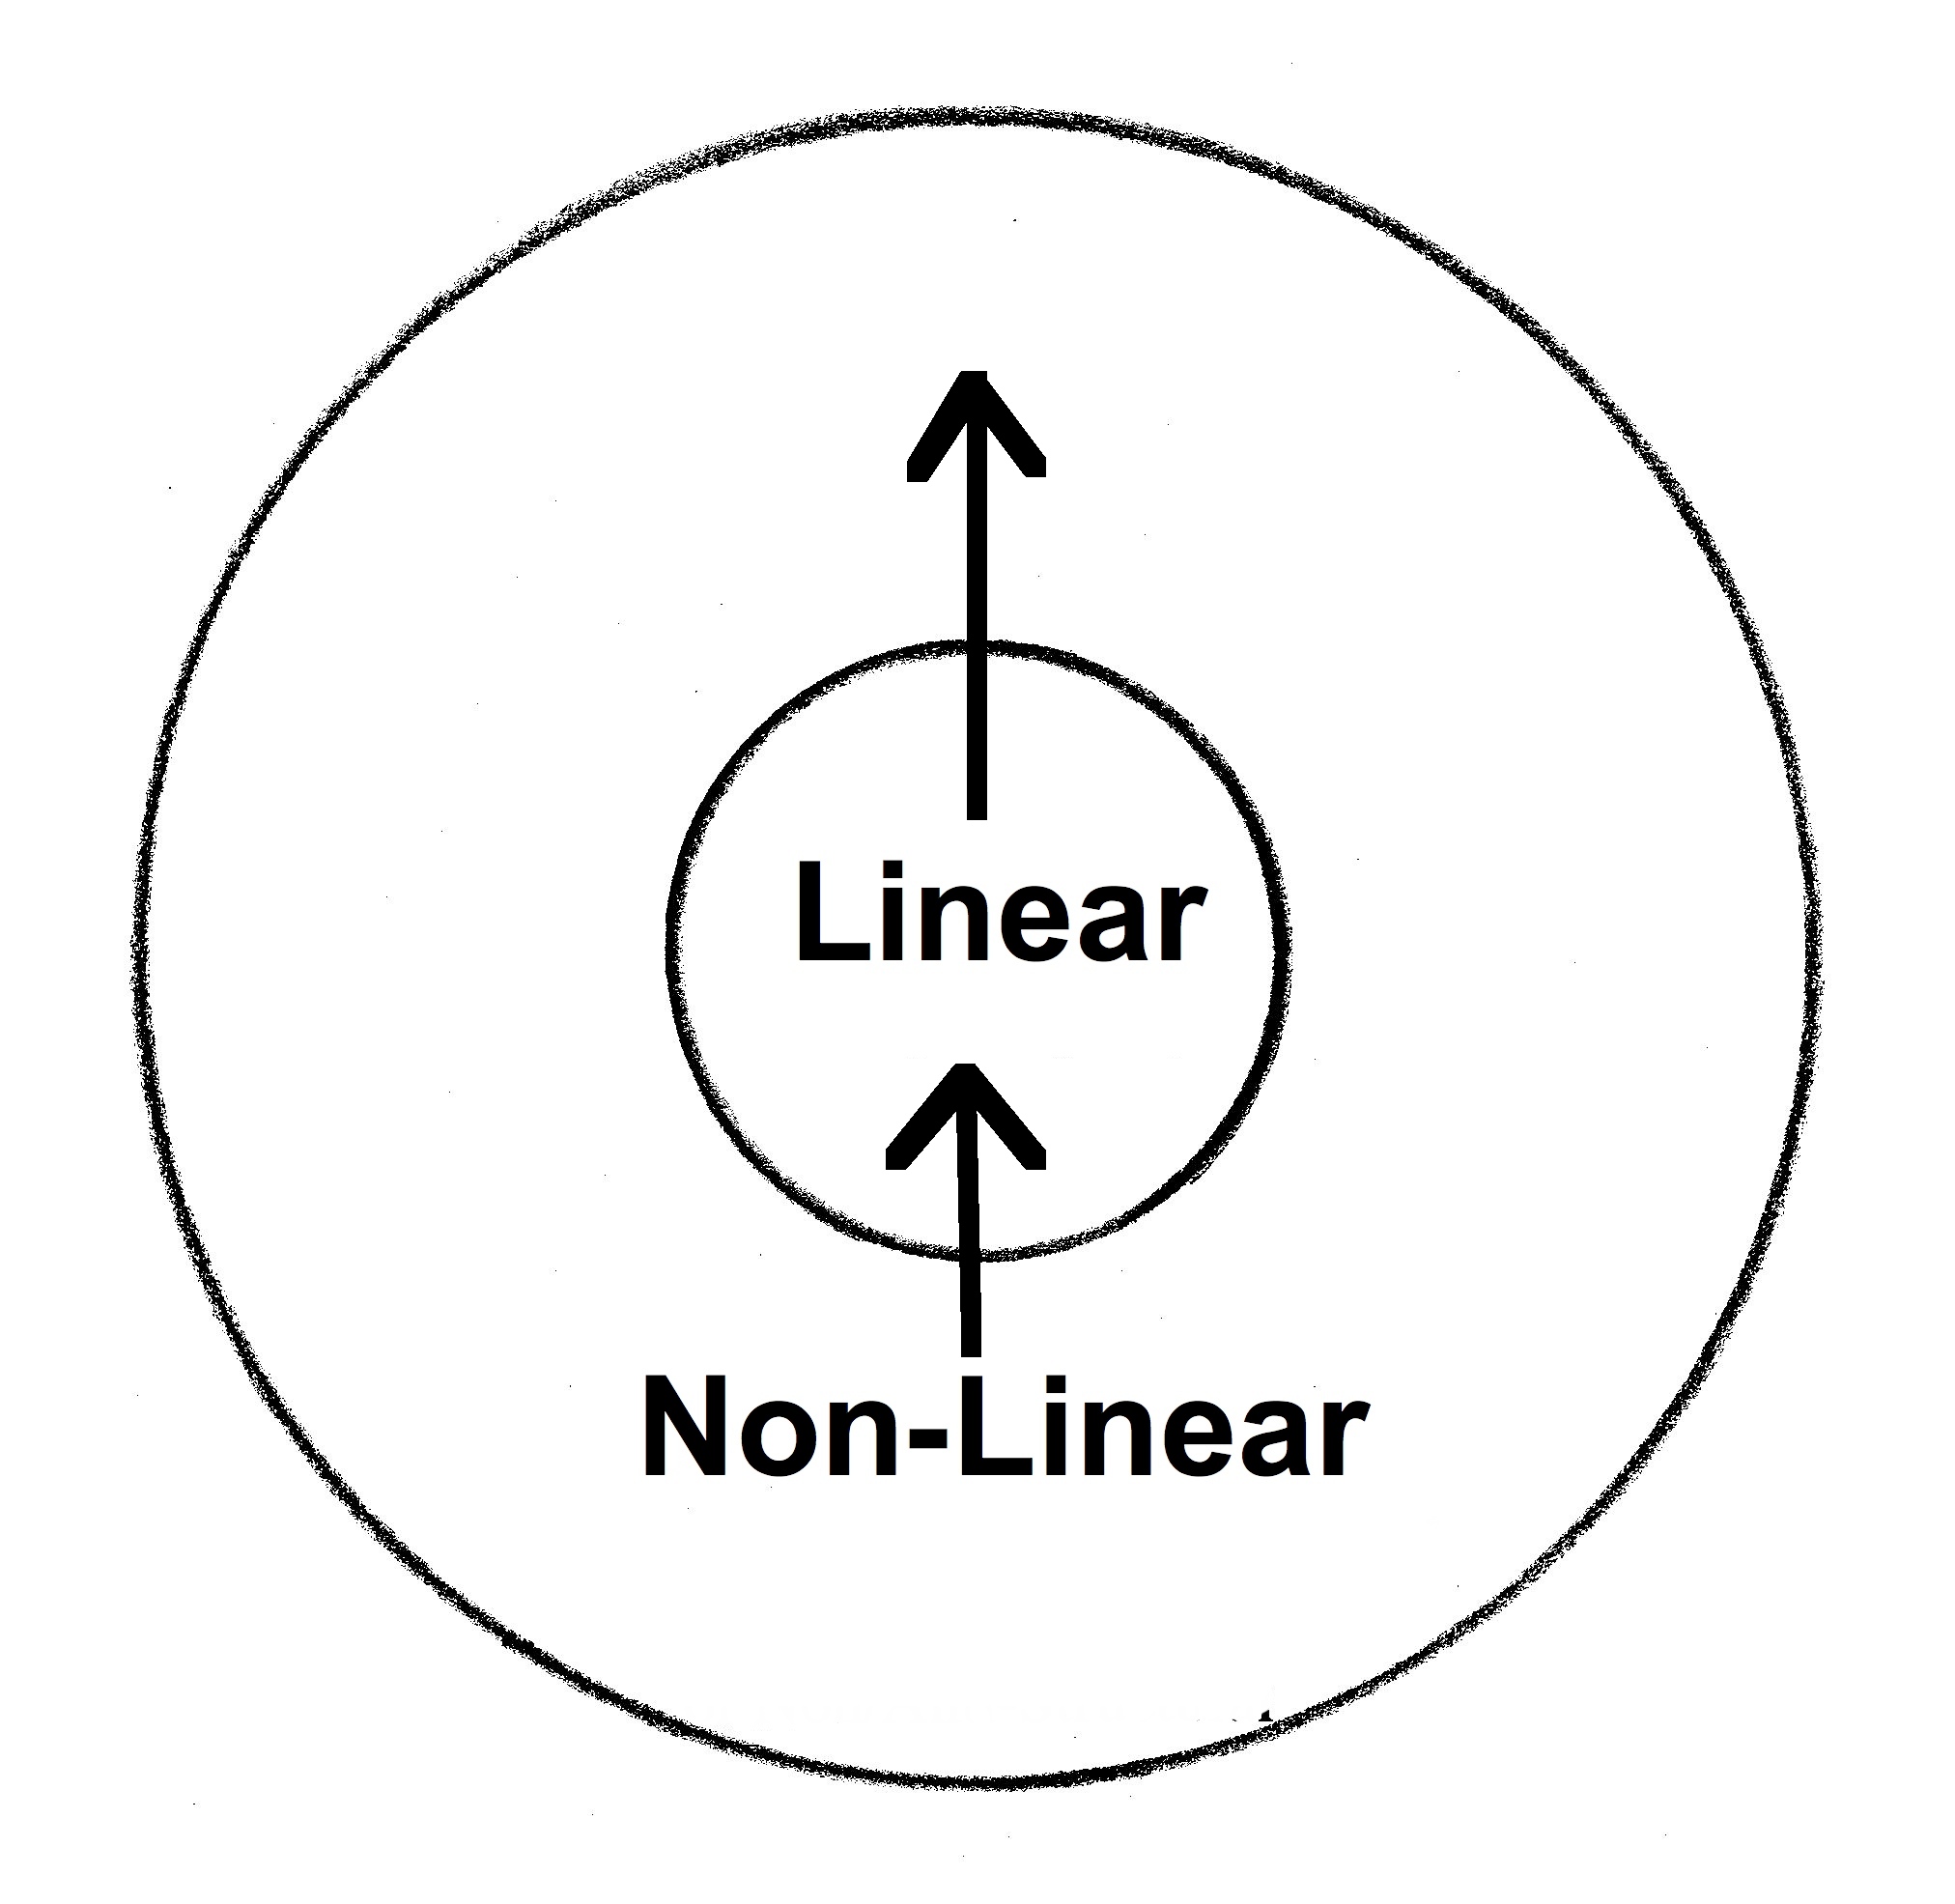 ircles-move-Linear-out-Non-in